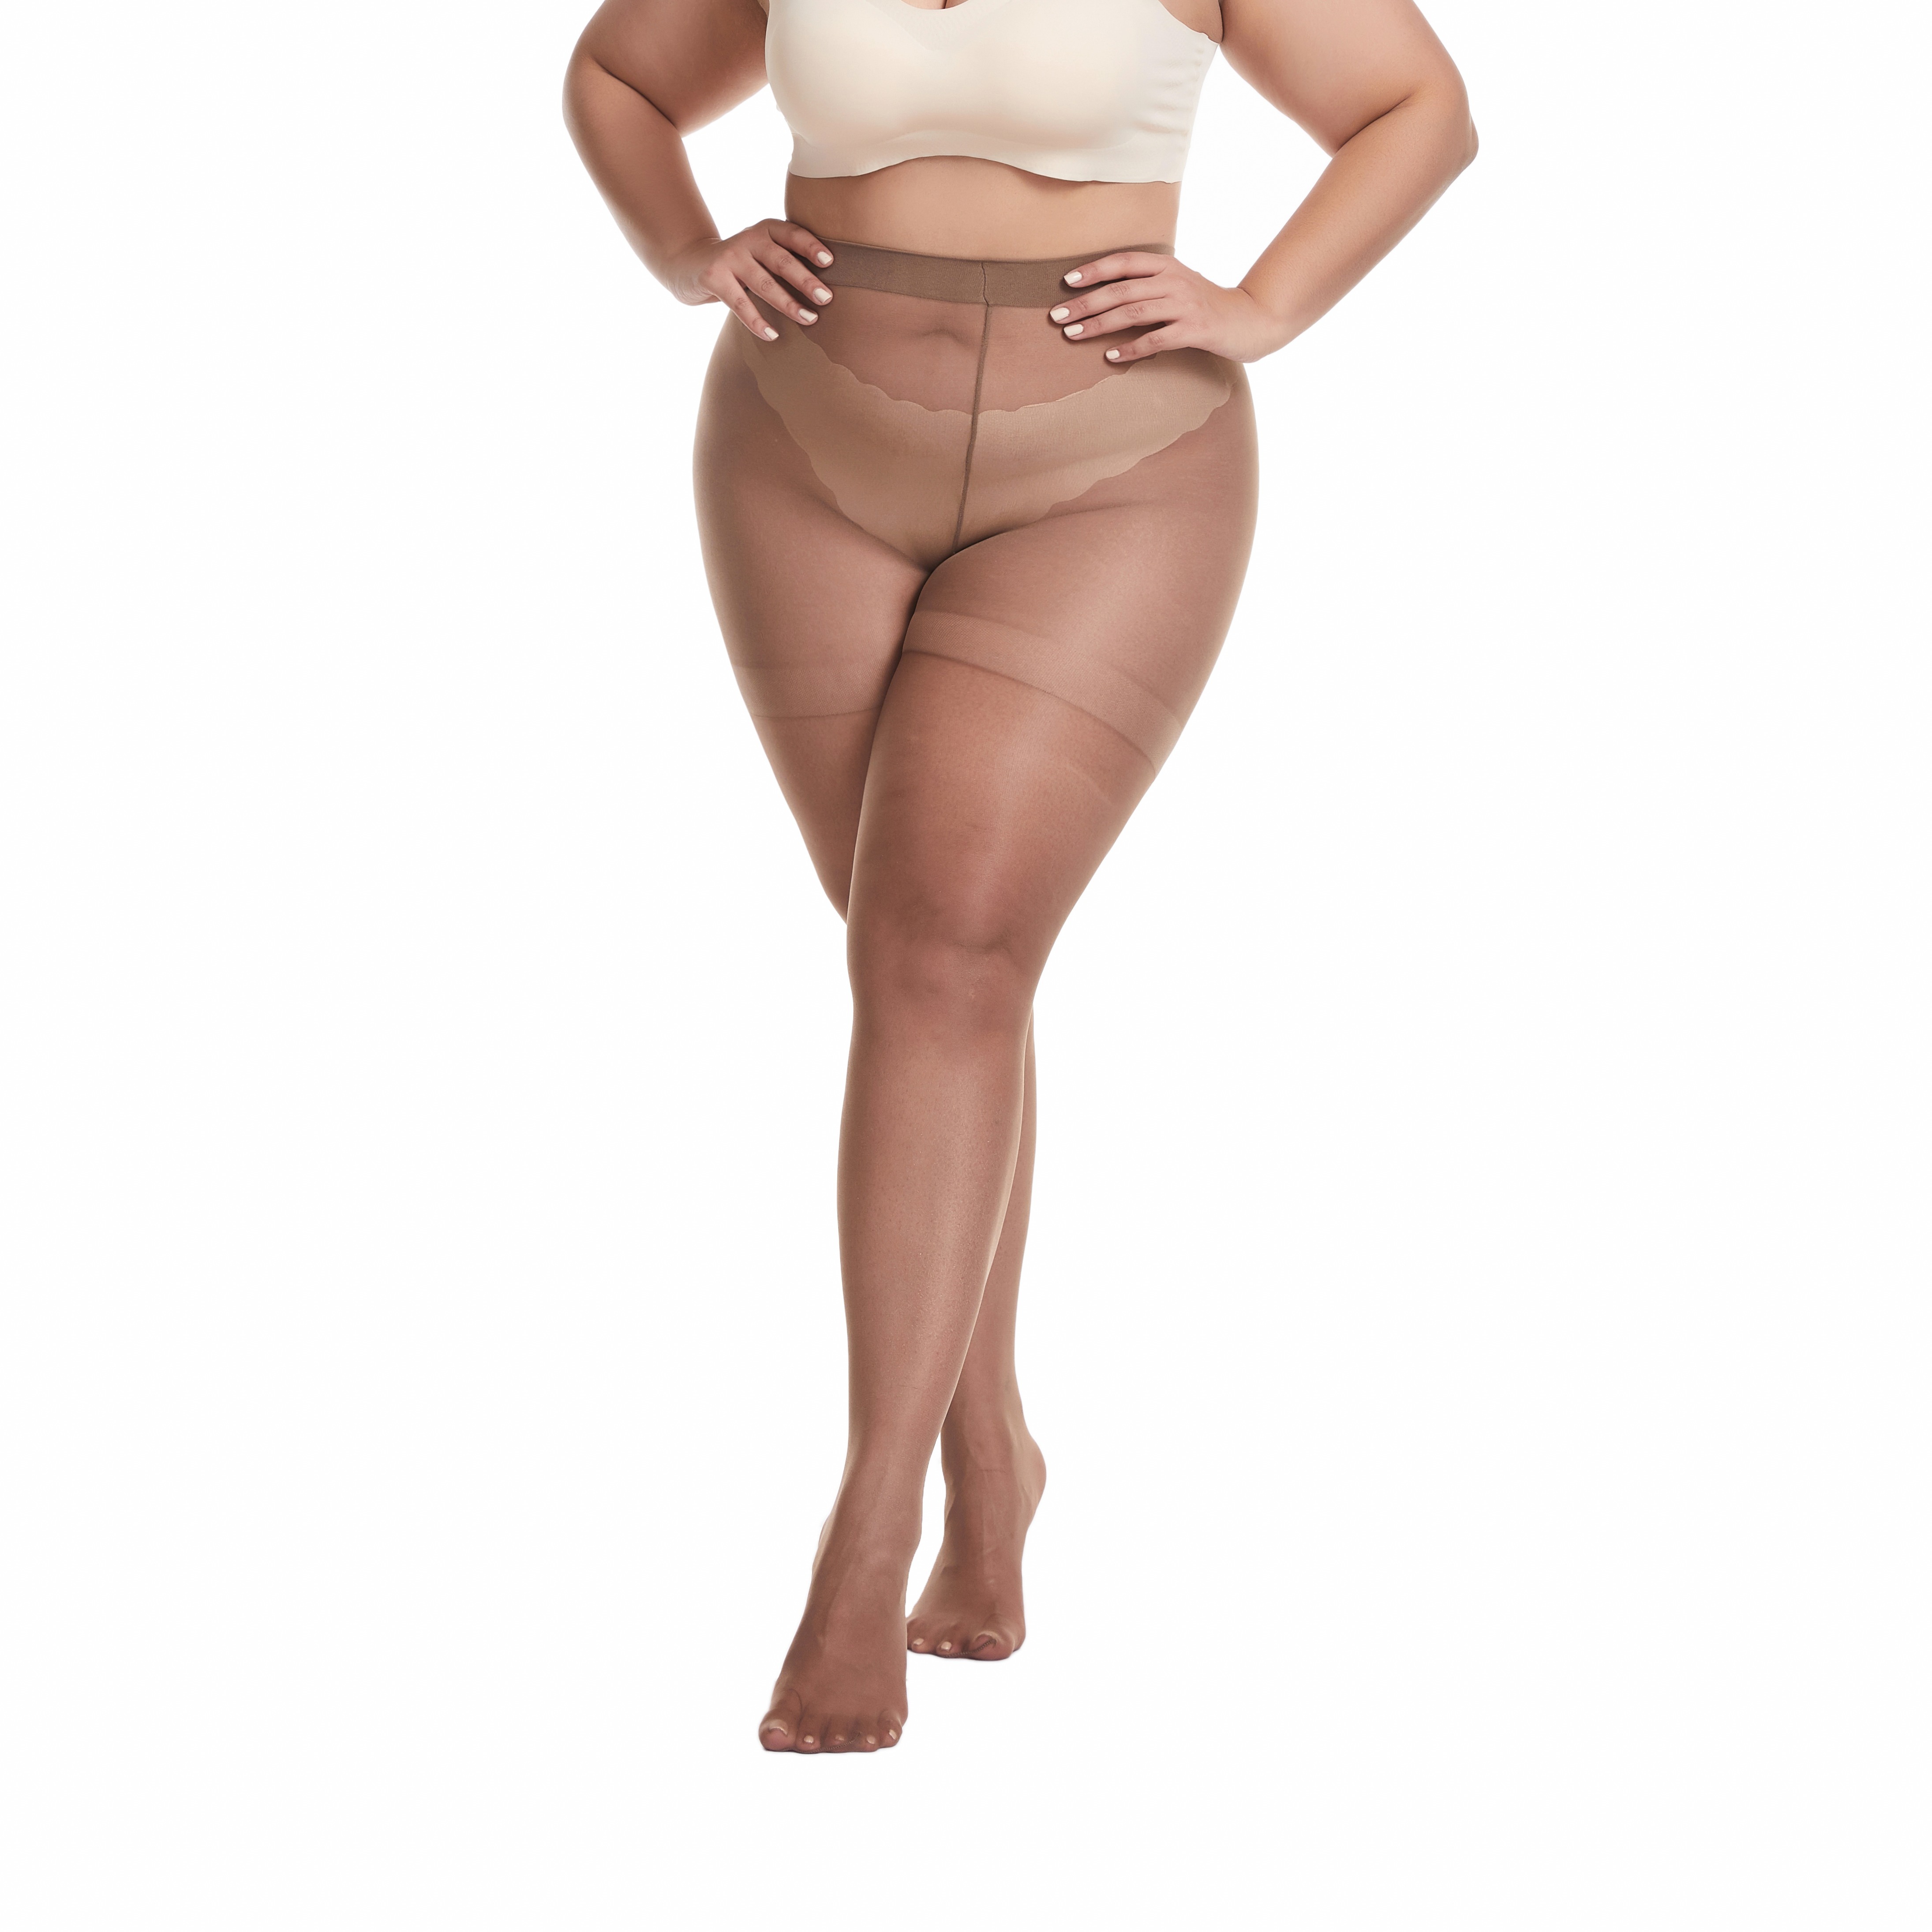 Sheer Pantyhose Plus Size - 2 Pack 20D Ultra Durable Thailand